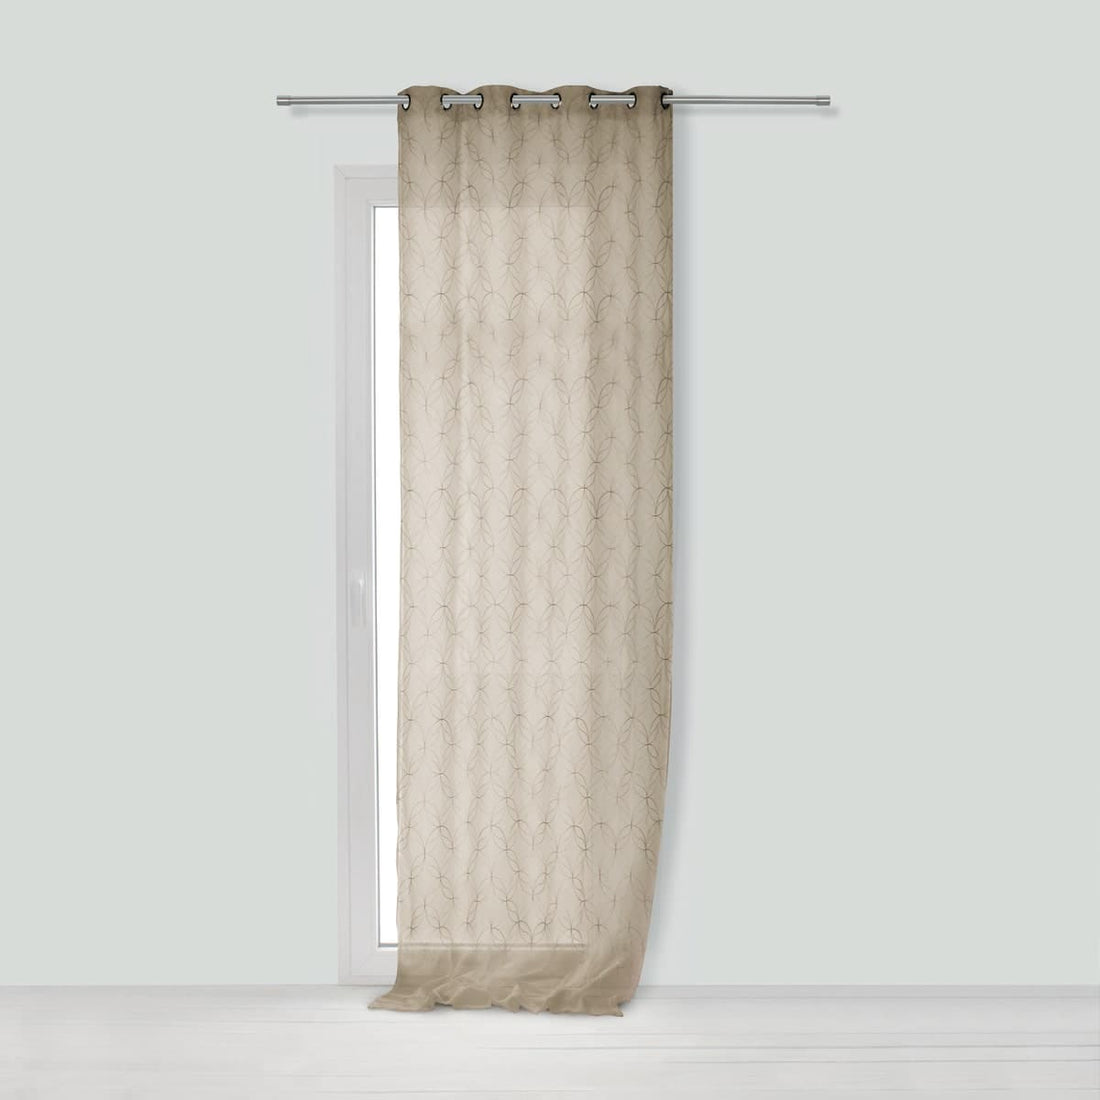 ABELA DOVE GREY FILTER CURTAIN 140X280 CM WITH EYELETS - best price from Maltashopper.com BR480007448